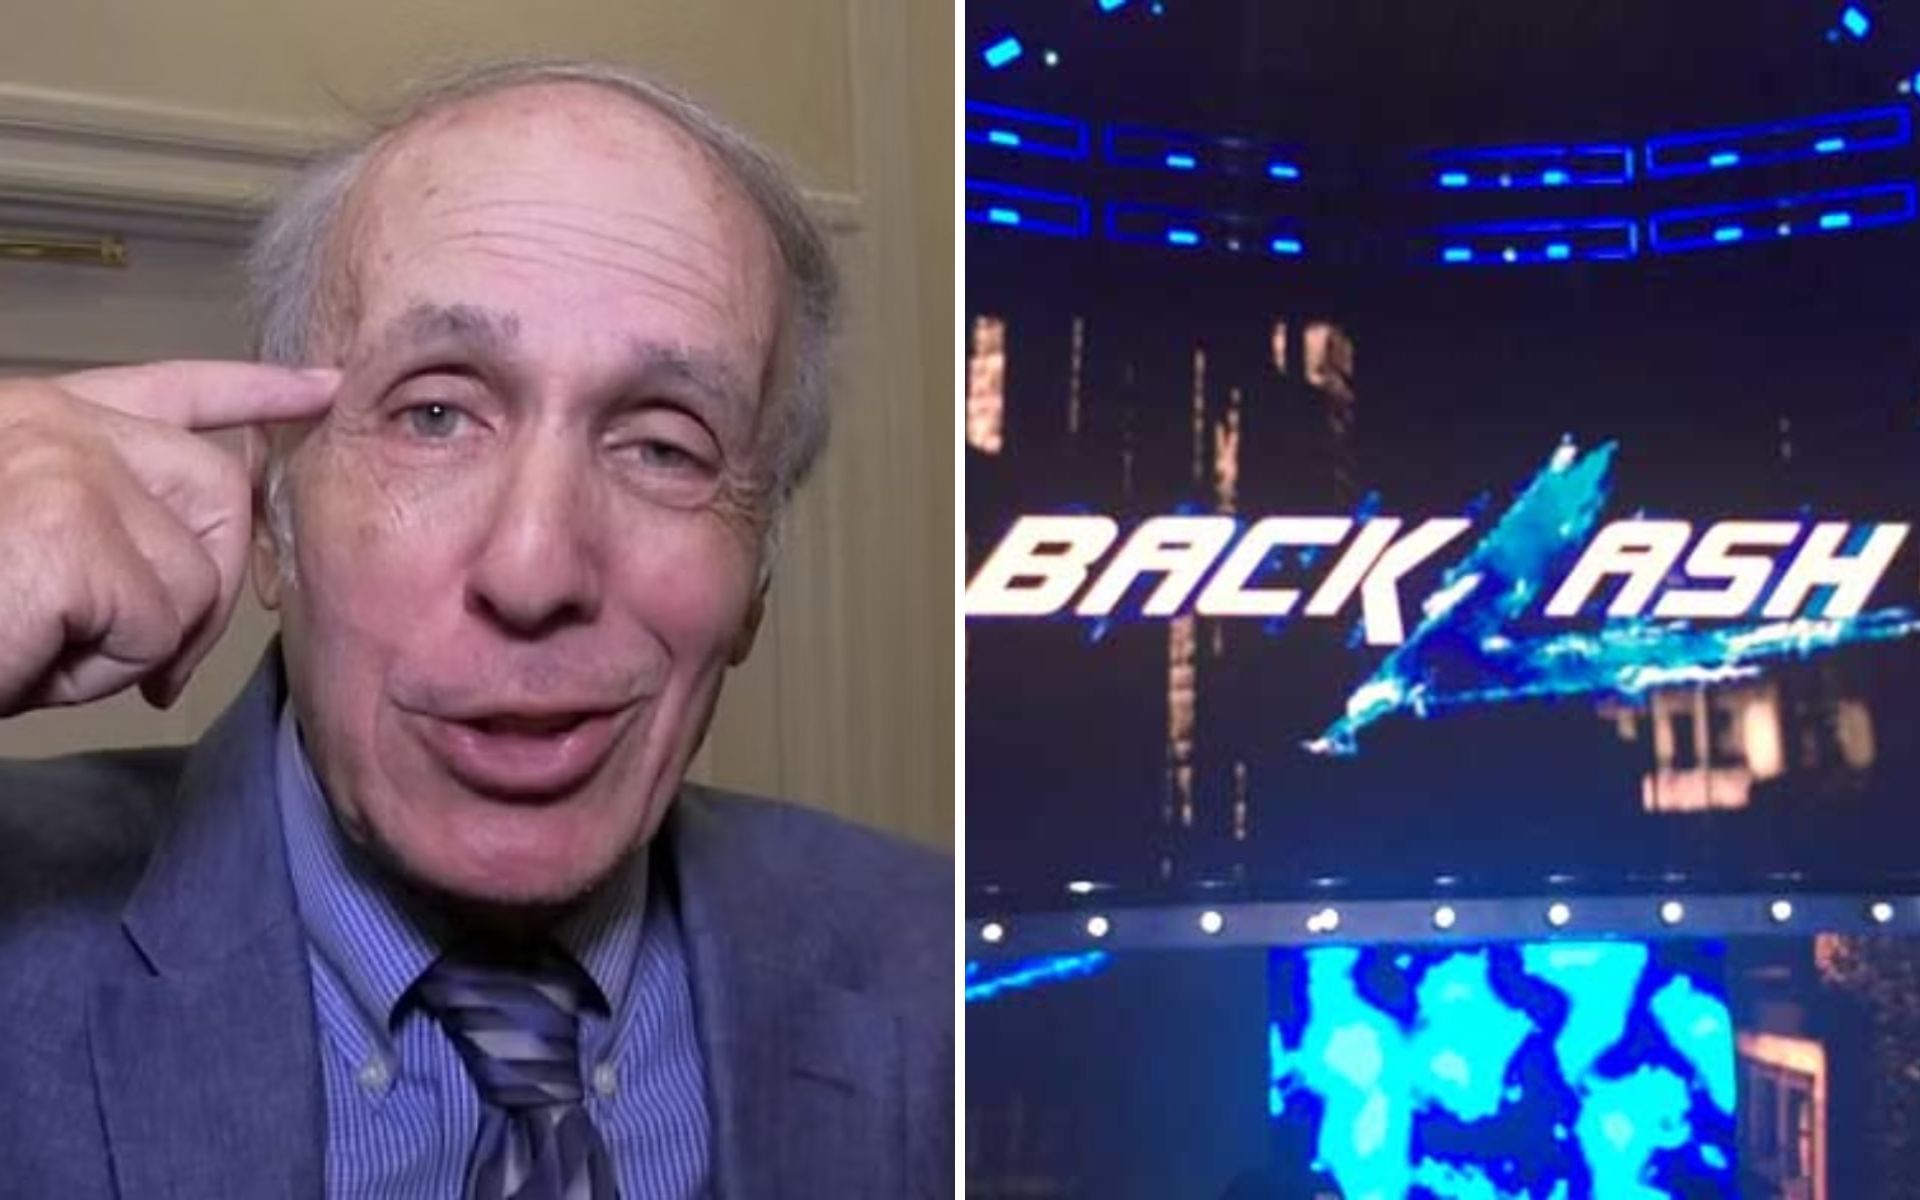 The legend of the business made a bold prediction for Backlash 2023